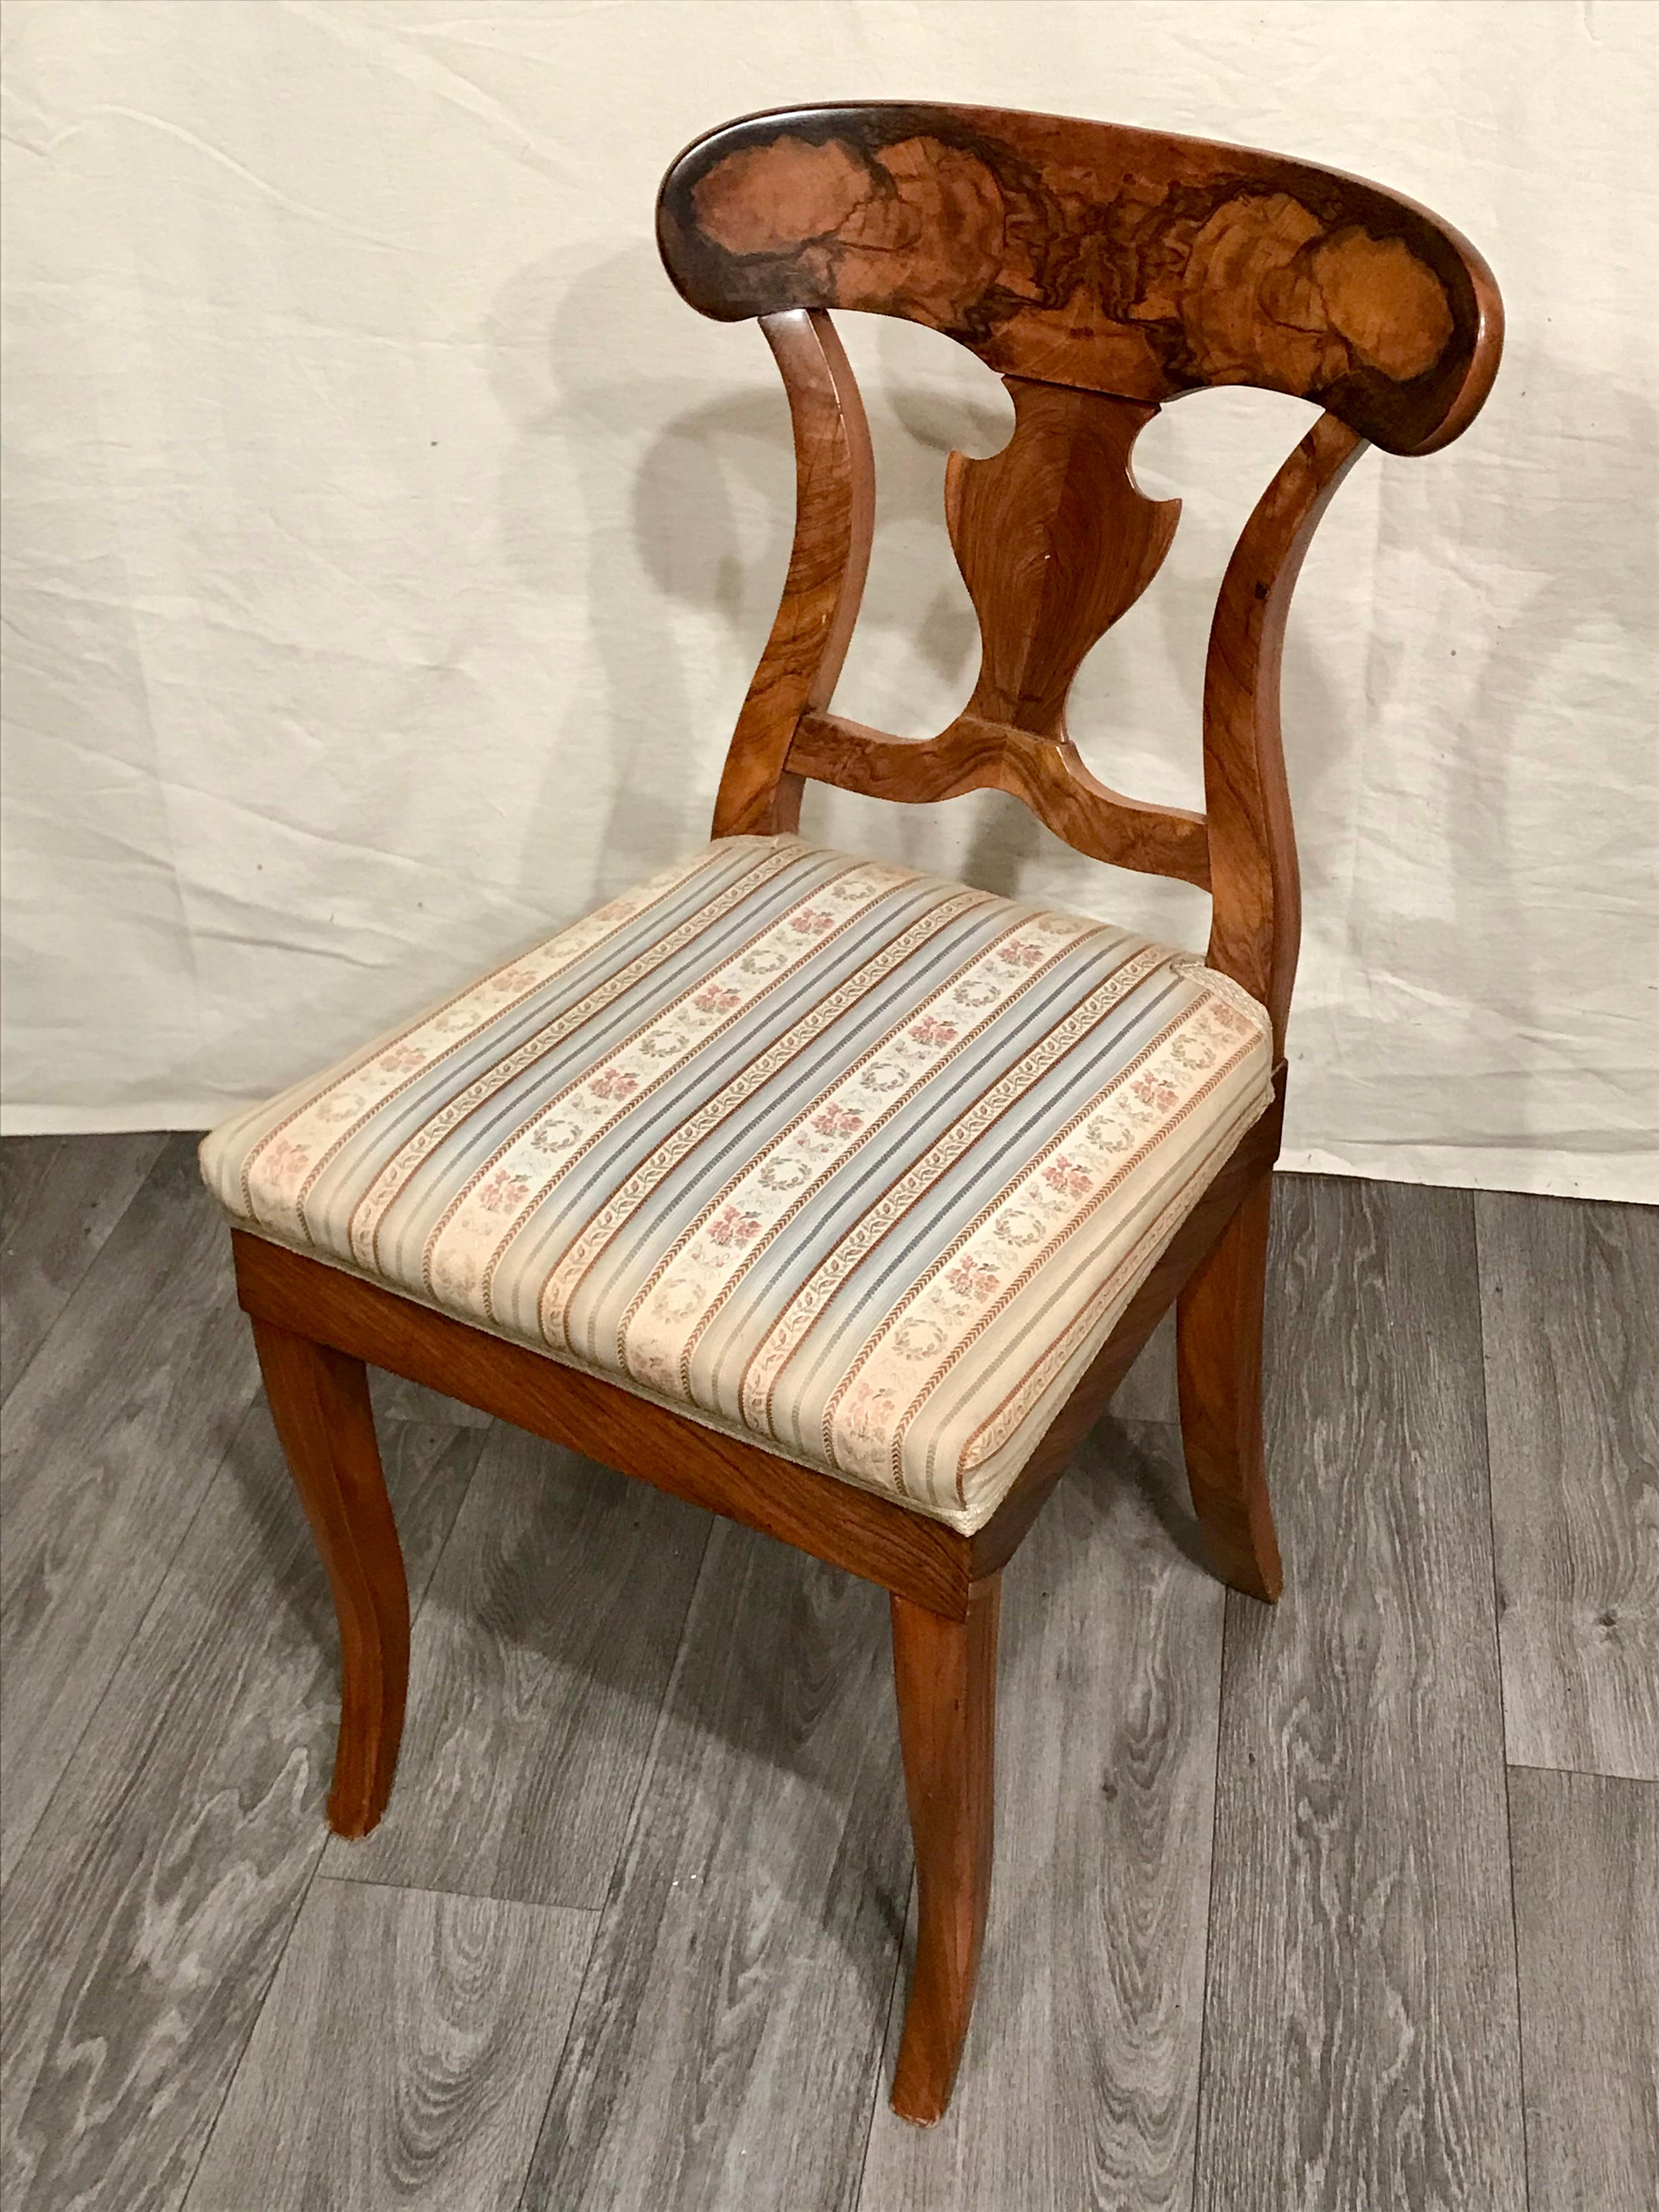 Pair of Biedermeier chairs, South West Germany 1820, walnut veneer.
Original pair of Biedermeier chairs with a nicely designed back which features a beautiful walnut veneer grain. 
The chairs are in good original condition. On the bottom of the